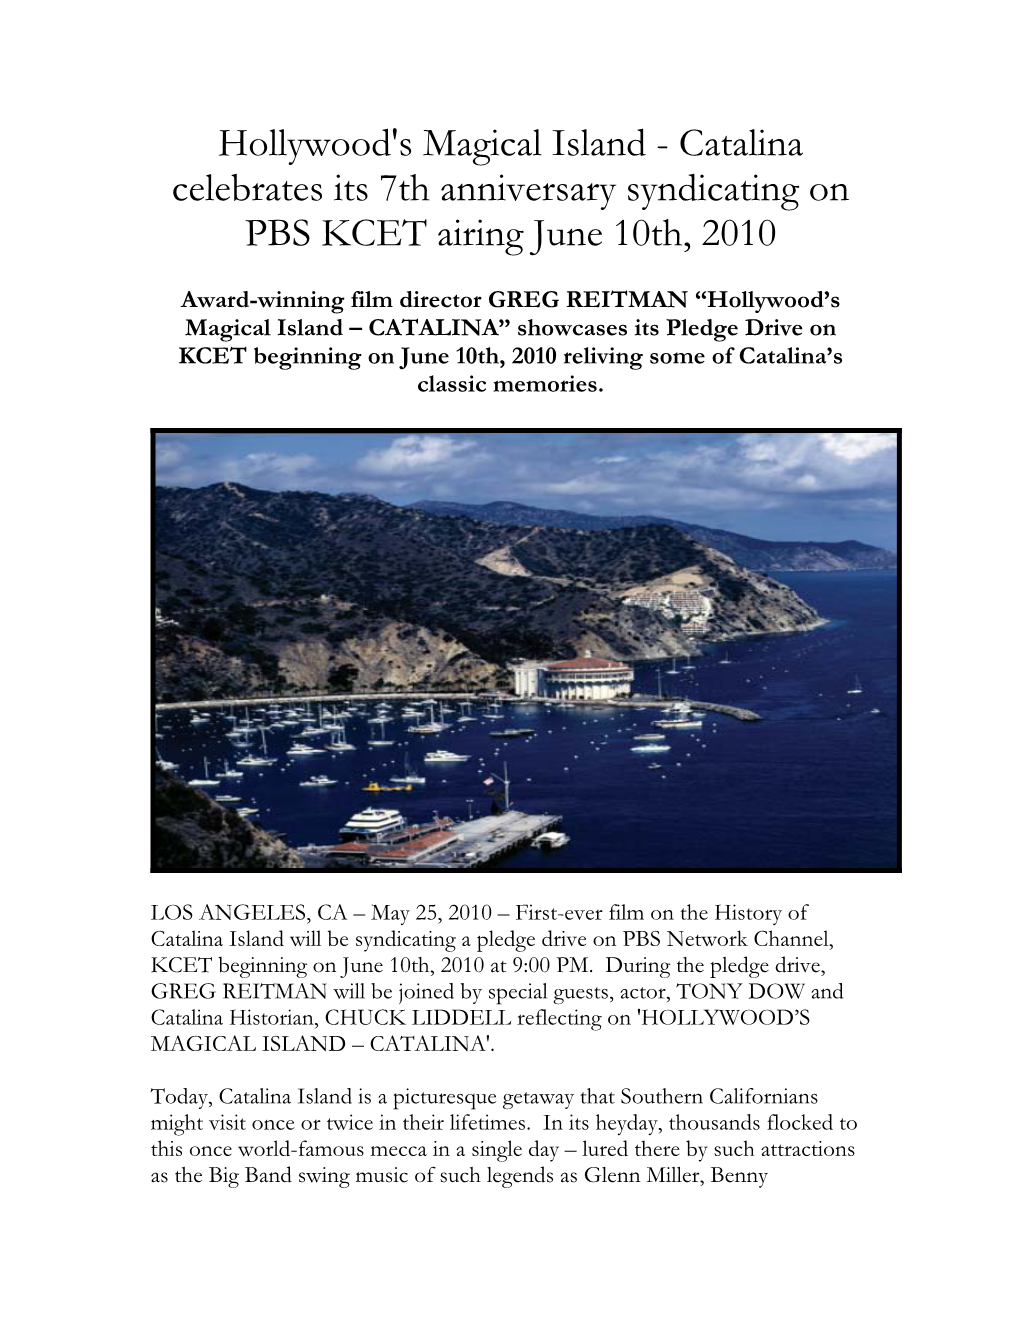 Hollywood's Magical Island - Catalina Celebrates Its 7Th Anniversary Syndicating on PBS KCET Airing June 10Th, 2010